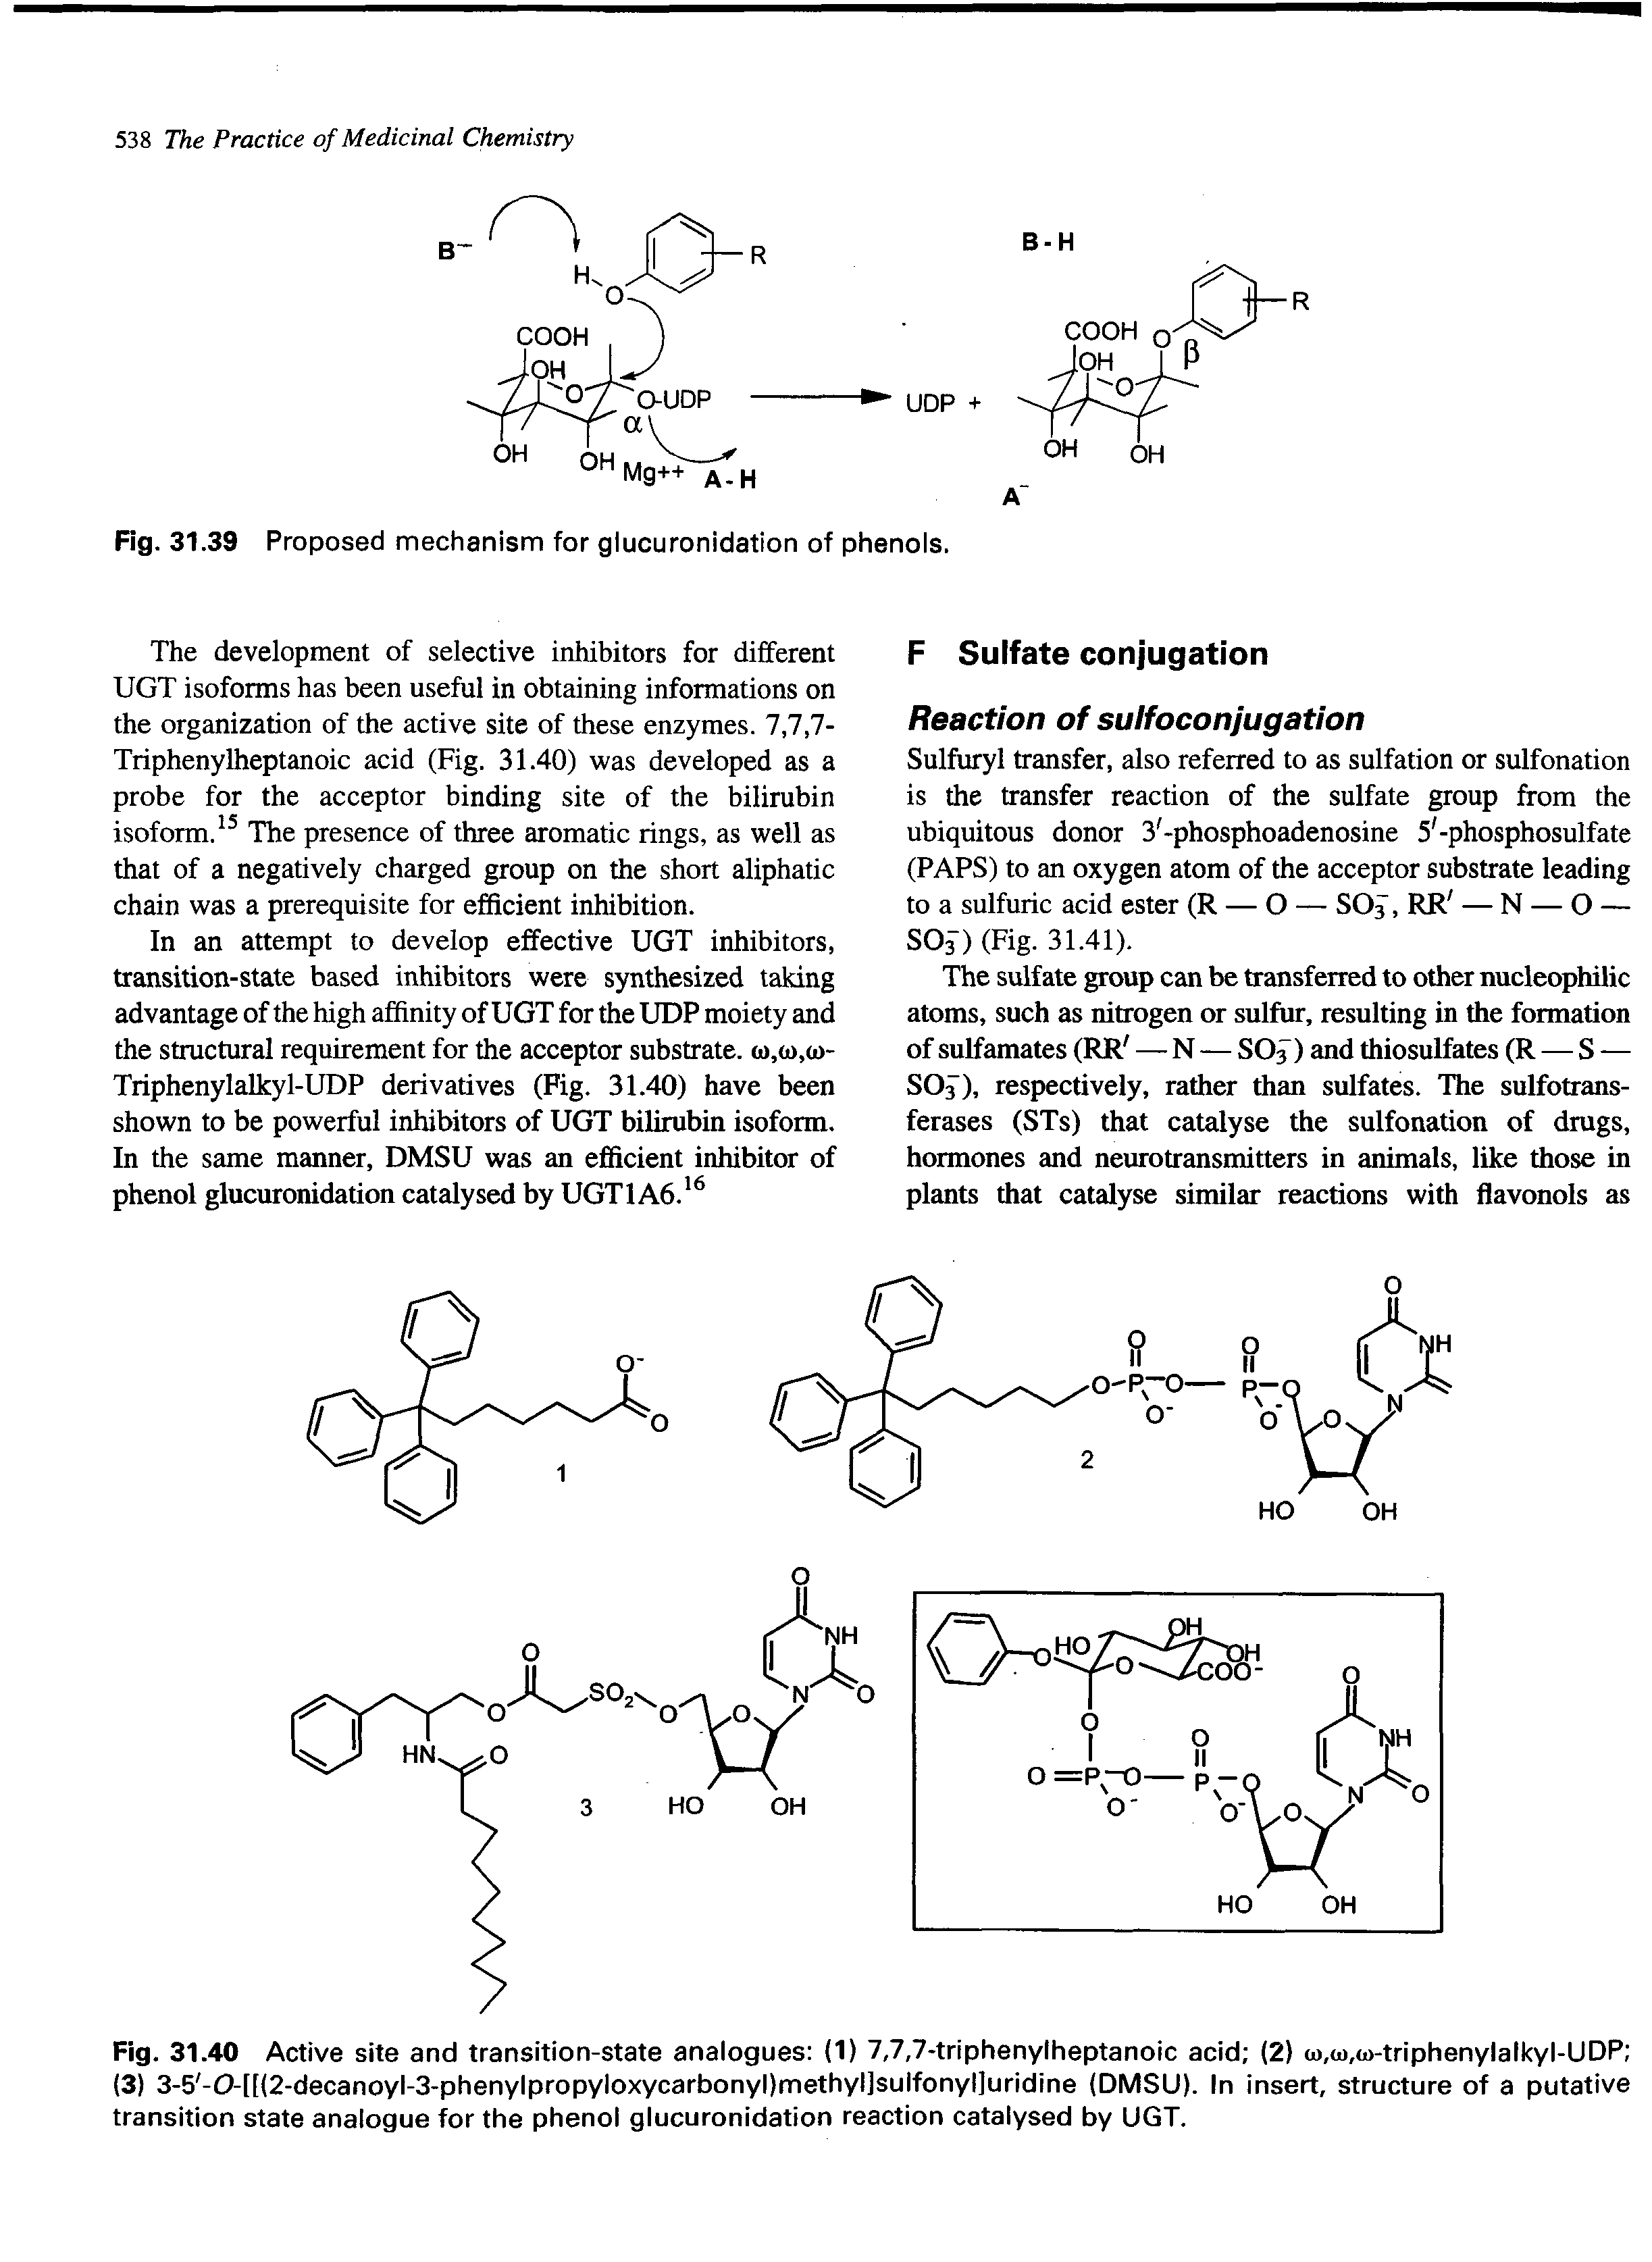 Fig. 31.40 Active site and transition-state analogues (1) 7,7,7-triphenylheptanoic acid (2) w,(i),<i>-triphenylalkyl-UDP (3) 3-5 -0-[[(2-decanoyl-3-phenylpropyloxycarbonyl)methyl]sulfonyl]uridine (DMSU). In insert, structure of a putative transition state analogue for the phenol glucuronidation reaction catalysed by UGT.